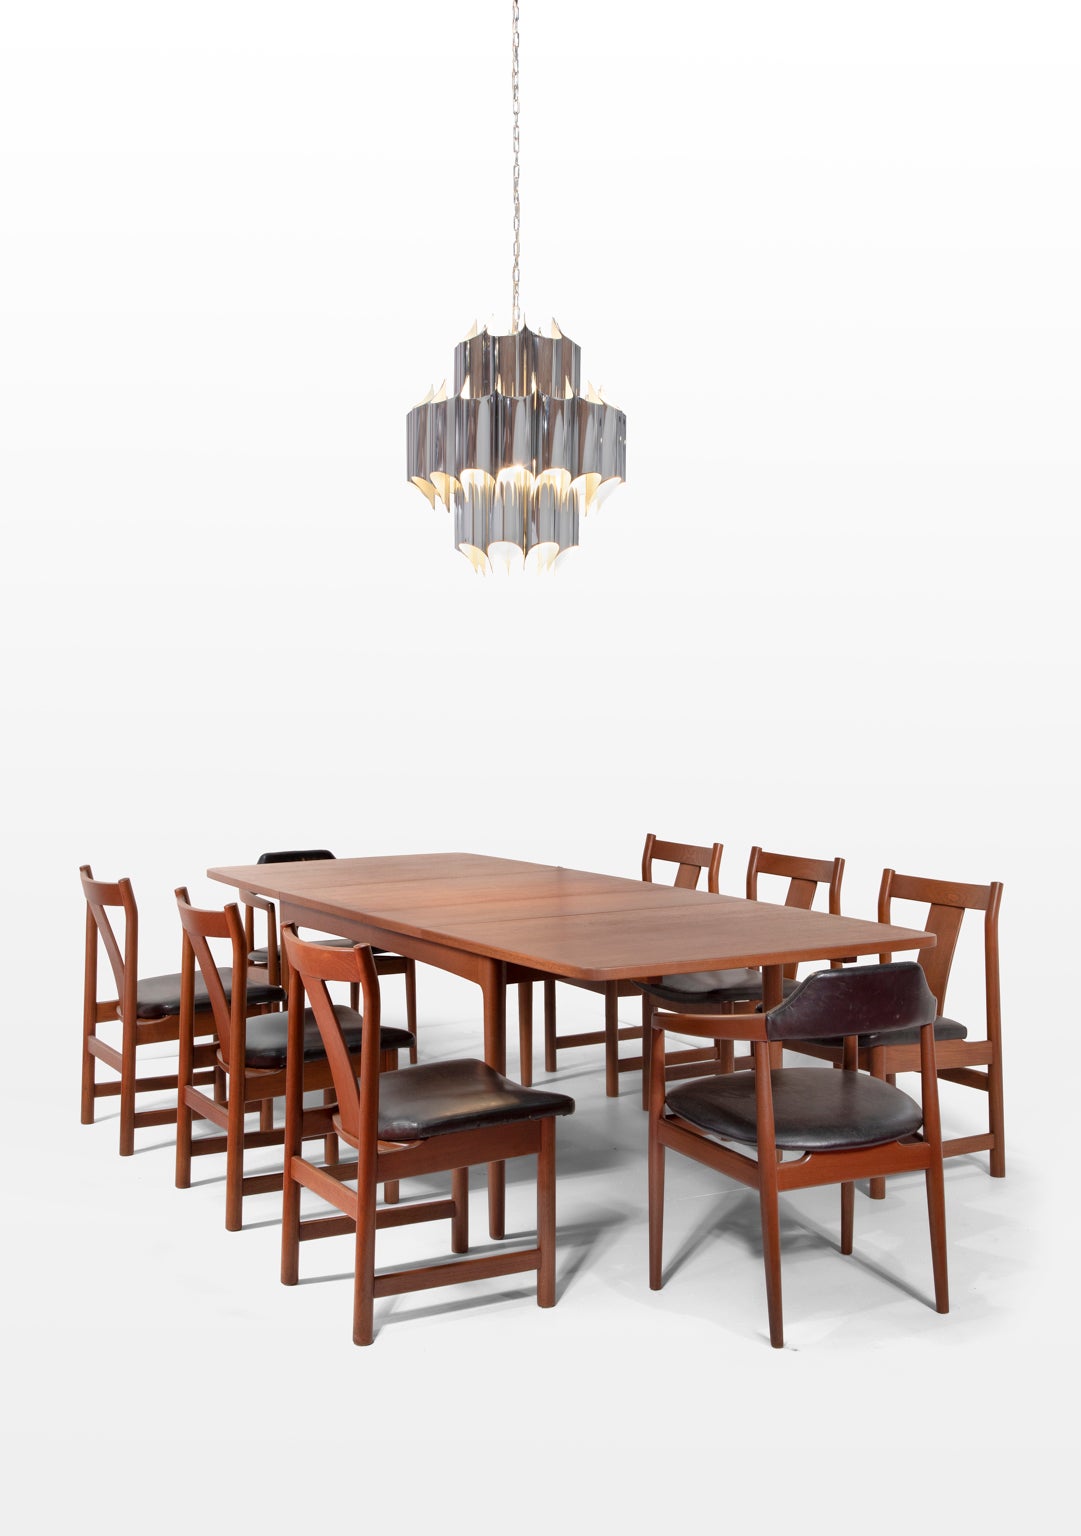 SALE ONE WEEK ONLY

Rare Mid-Century Modern dining table and eight  dining chairs with  black leather seats by Erik Worts for Henrik  Worts Mobelsnedkeri, Denmark. A beautiful hand-crafted arrangement that is stunning with beautiful clean lines.